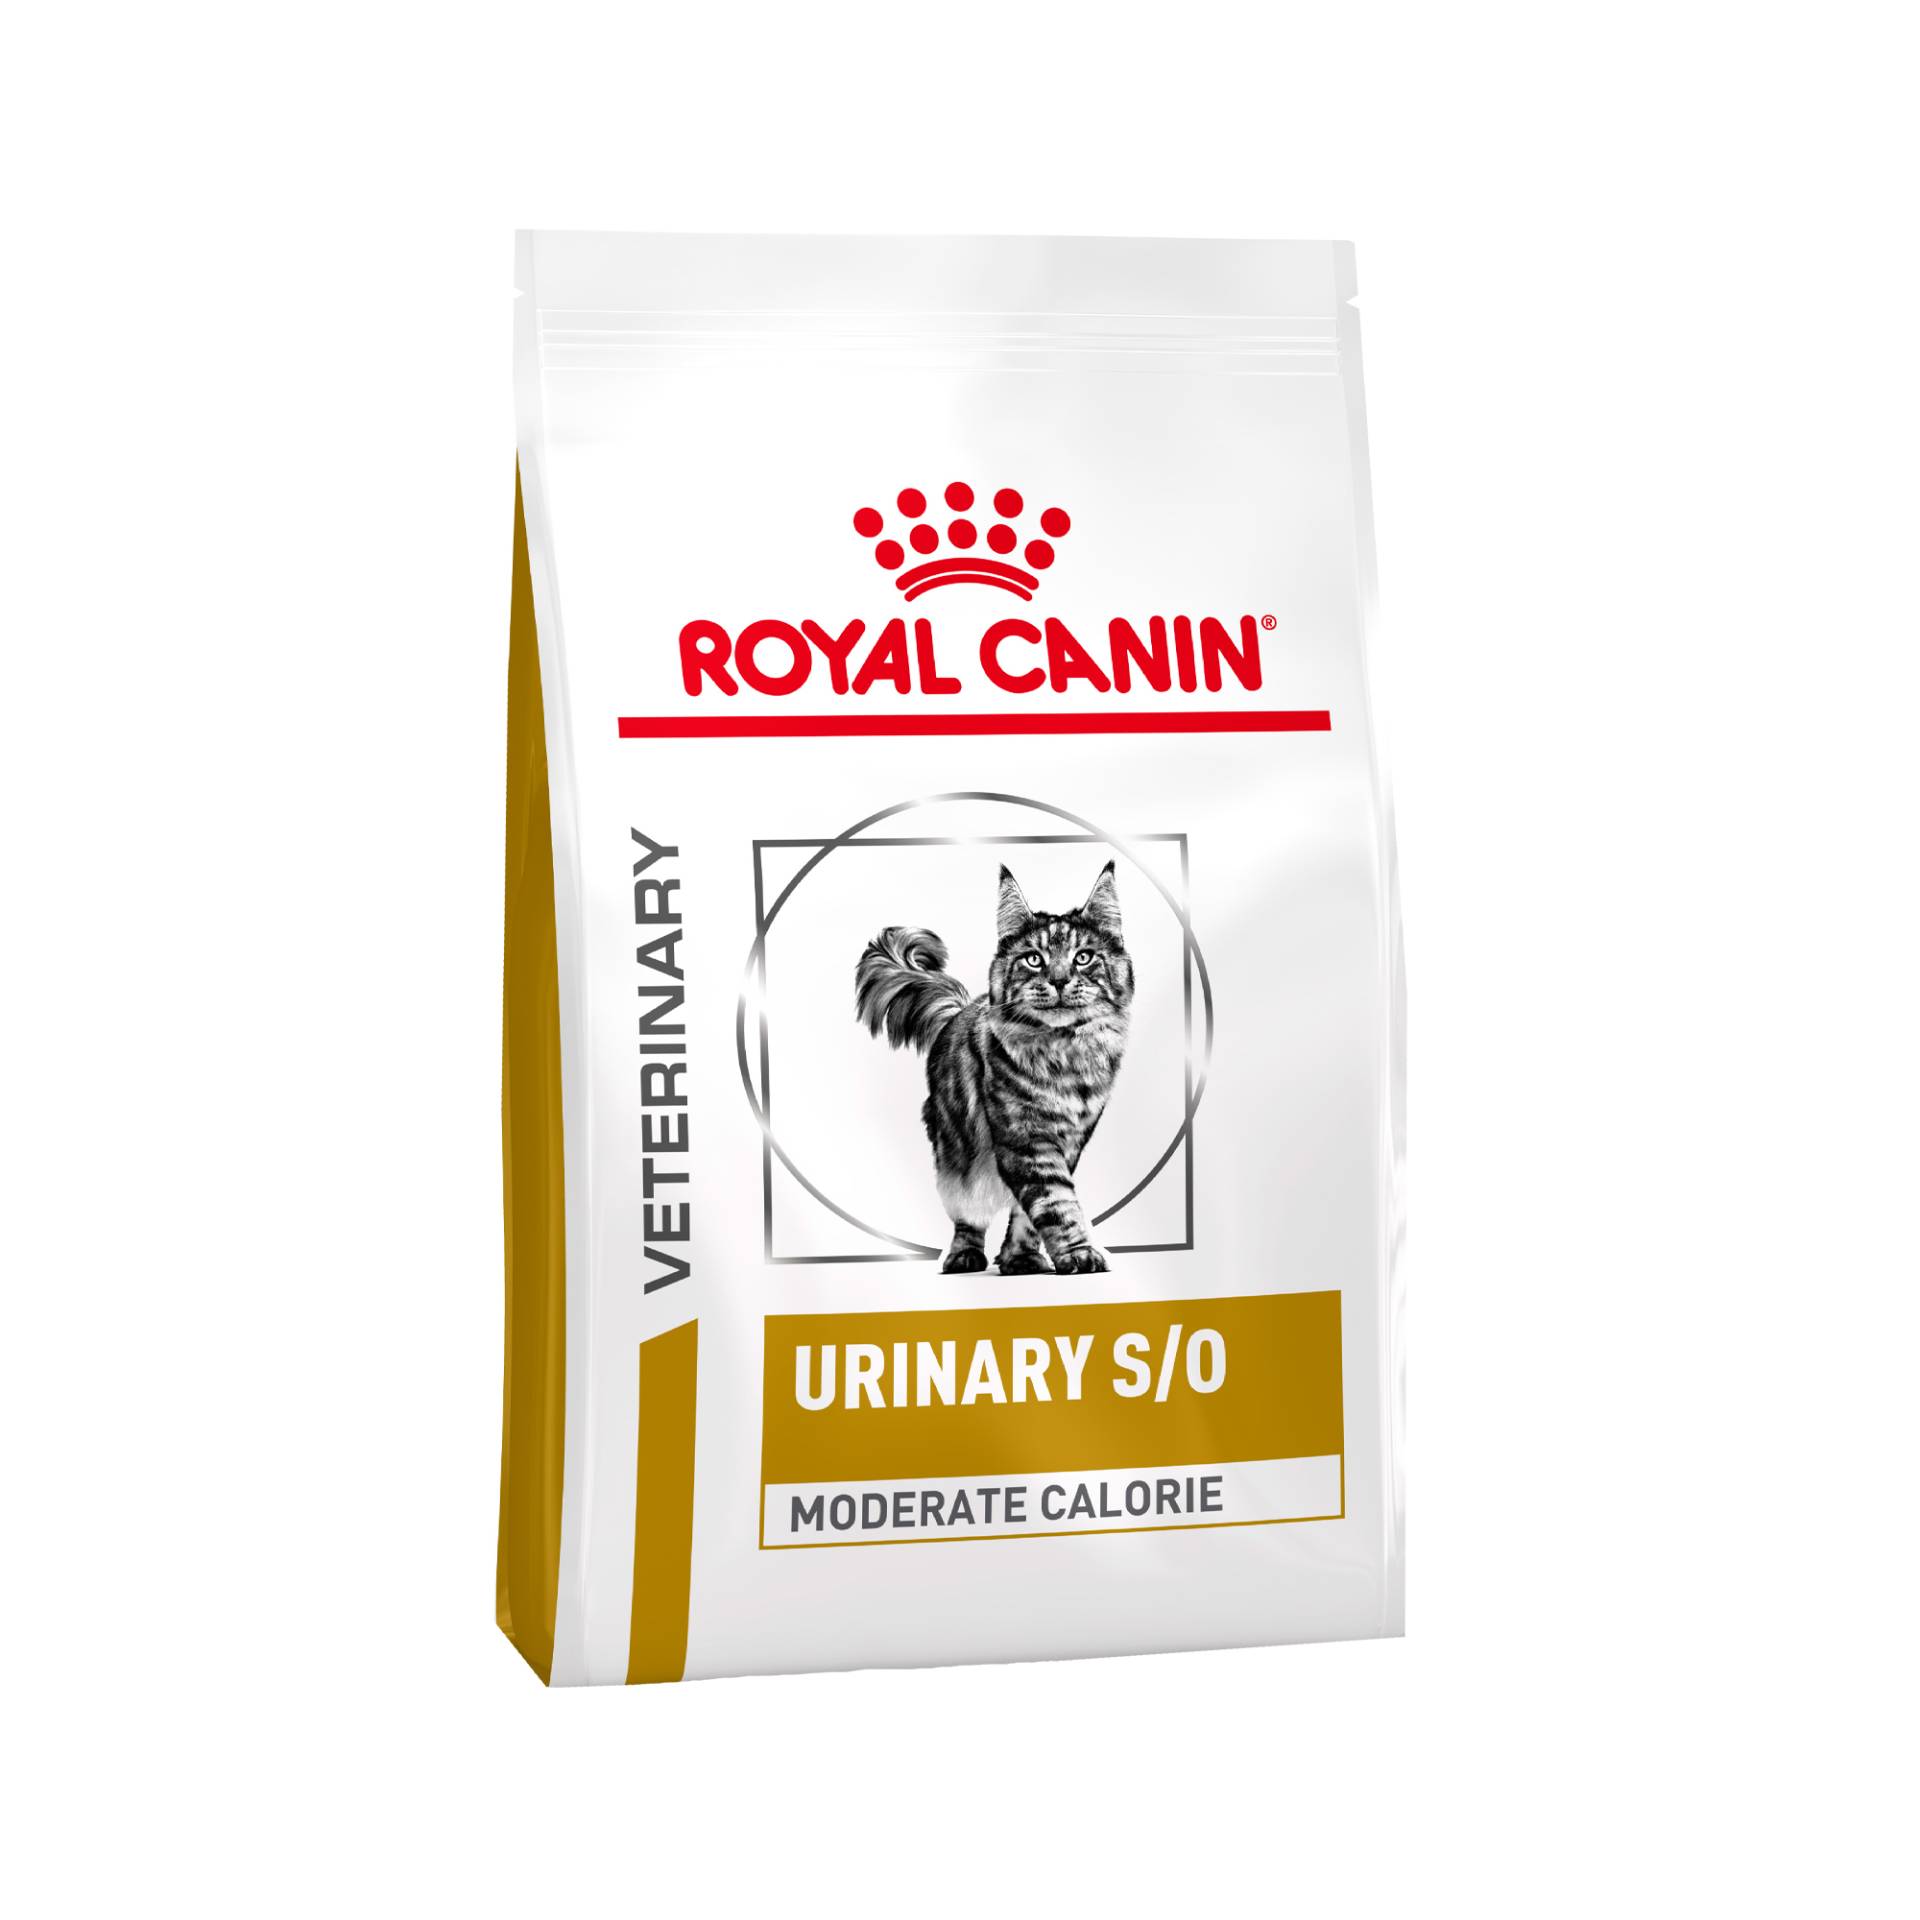 Royal Canin Urinary S/O Moderate Calorie Katze Sparpaket - 3,5 kg + 12 x 85 von Royal Canin